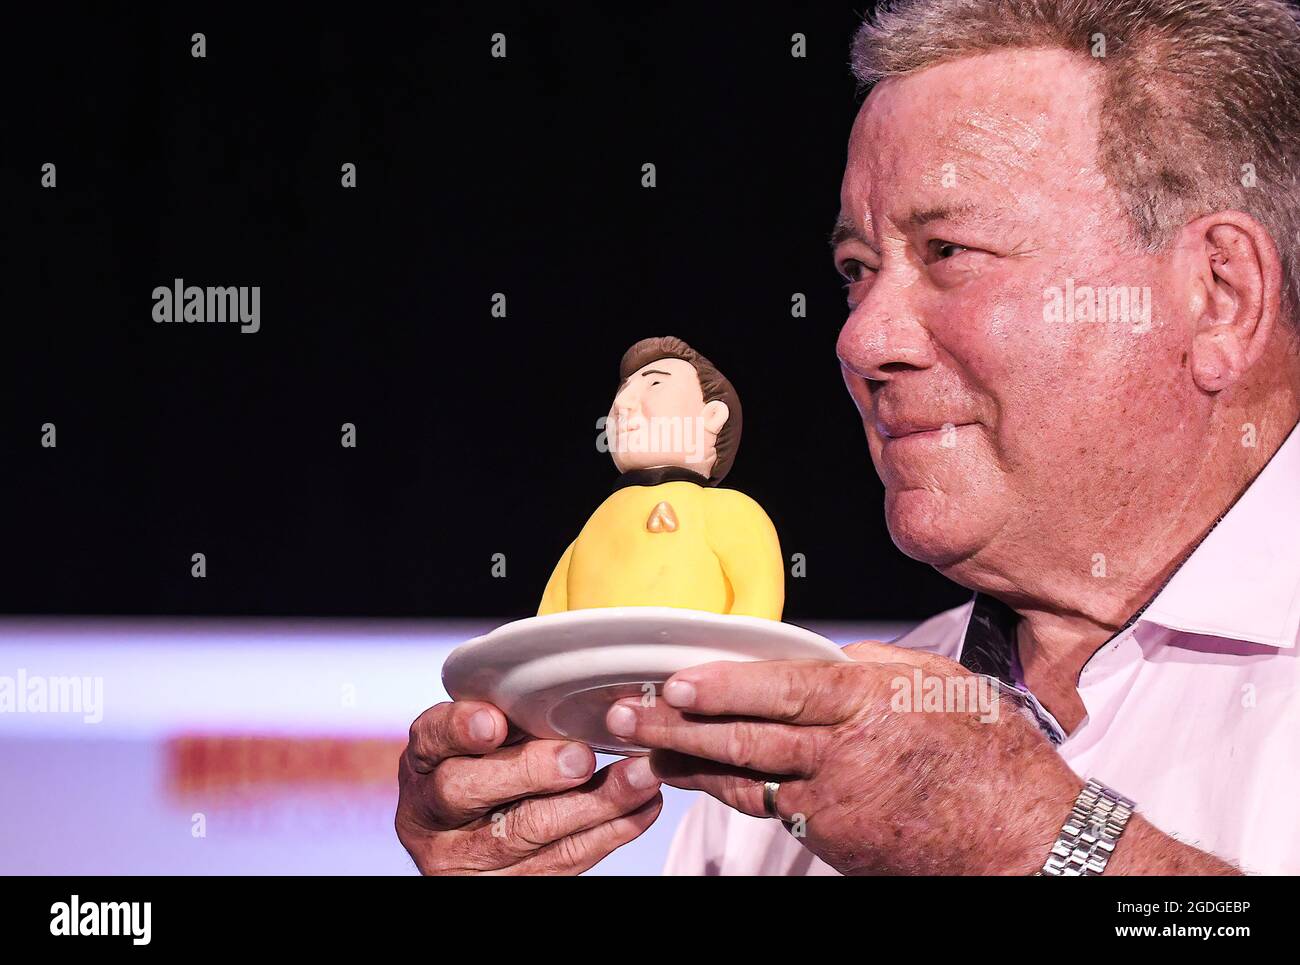 Actor William Shatner, best known for his portrayal of Captain James T. Kirk of the USS Enterprise in the Star Trek television series and movies, holds a portion of a birthday cake presented to him at a Q&A session on the opening day of MEGACON at the Orange County Convention Center. The 4-day convention caters to the comic book, sci-fi, anime, fantasy, and gaming communities, and features celebrity appearances. Due to the current spike in COVID-19 cases in Florida, all attendees are required to wear face masks. (Photo by Paul Hennessy/SOPA Images/Sipa USA) Stock Photo